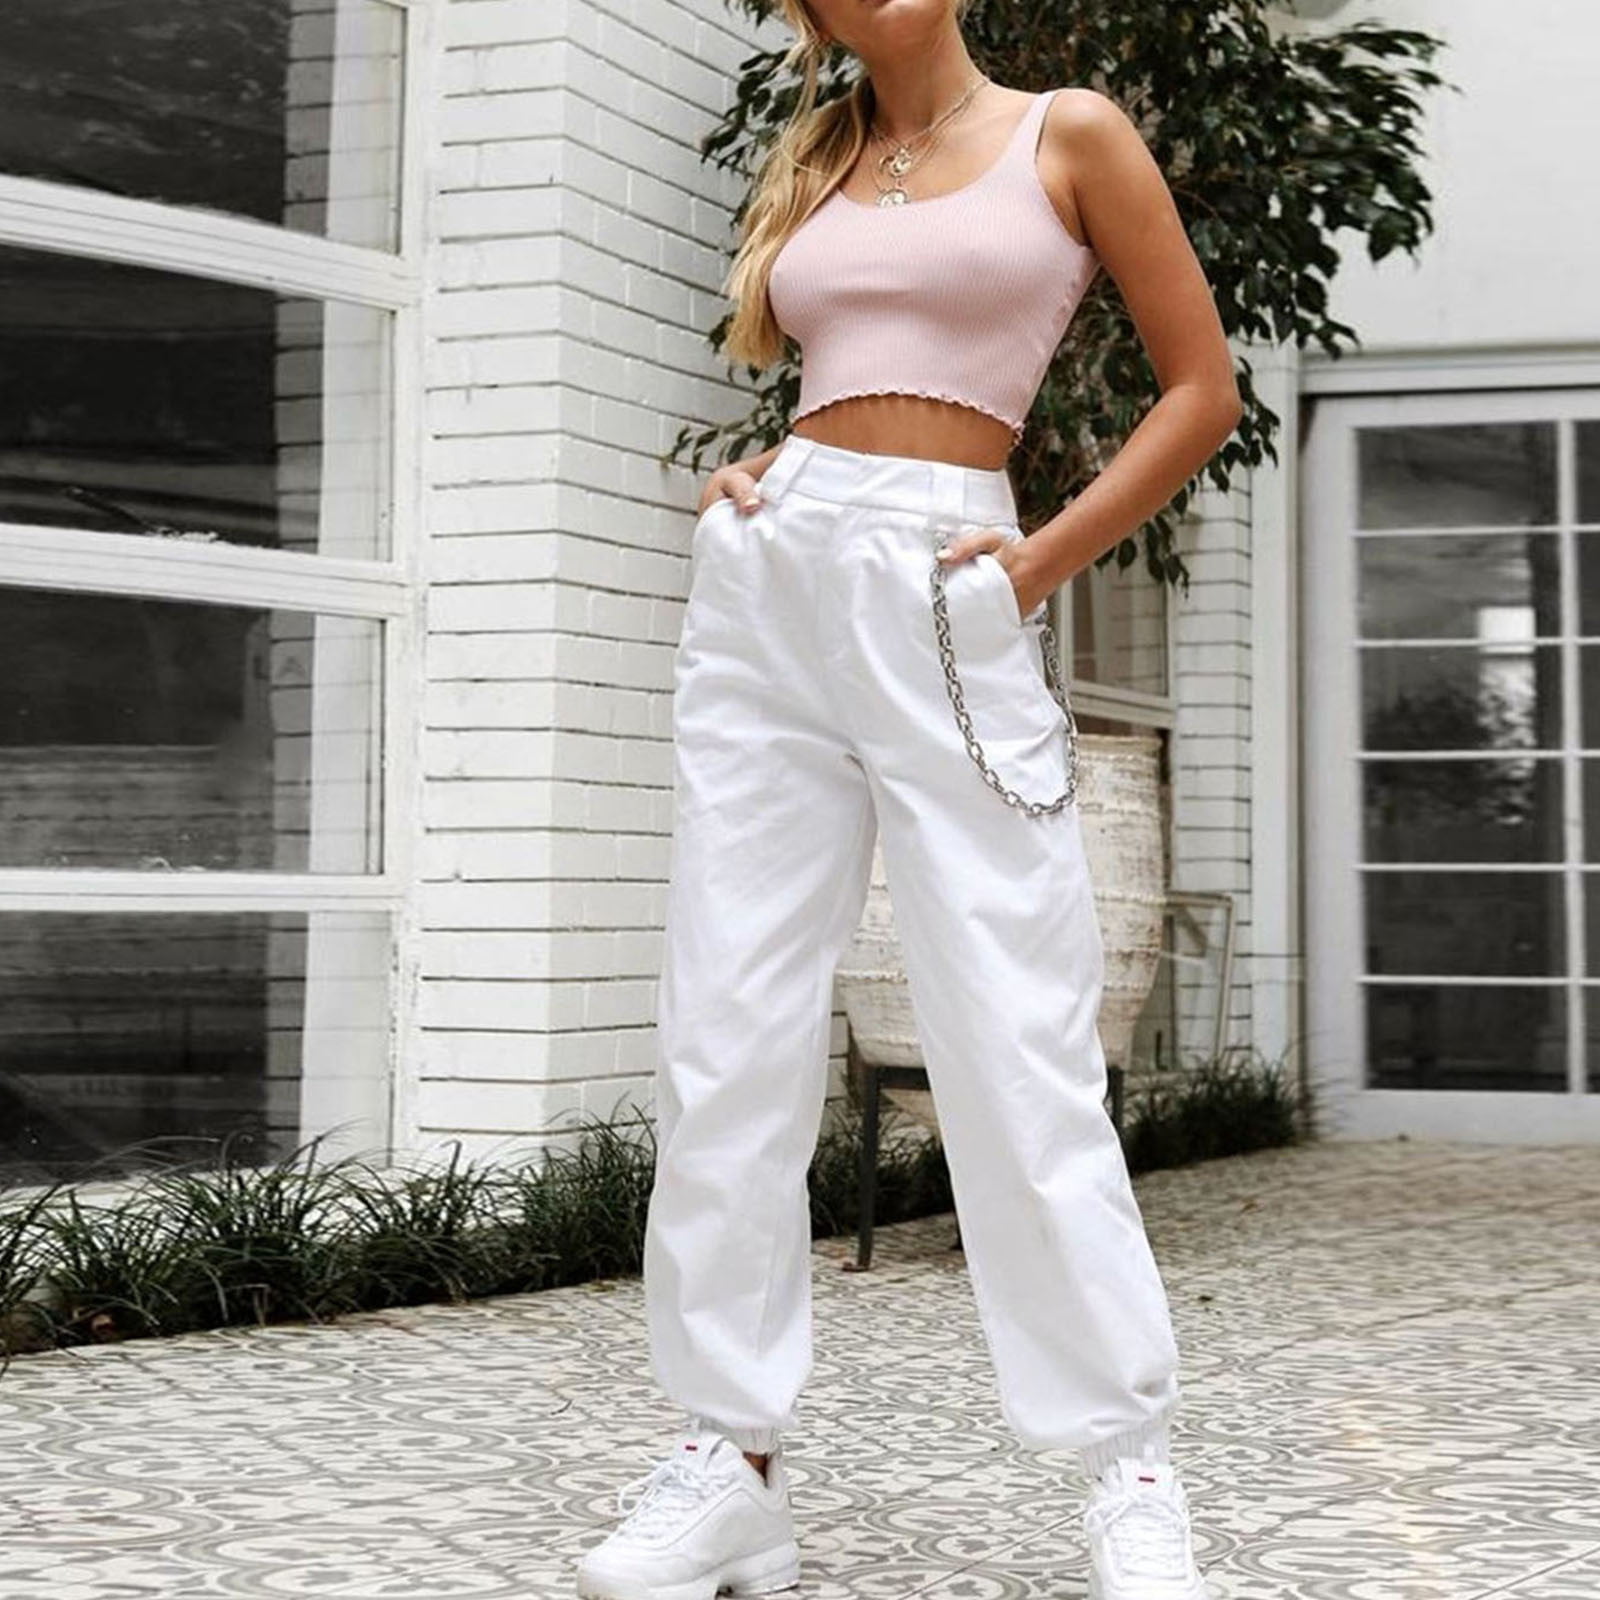 CHGBMOK Clearance Cargo Pants Women Fashion Chain Of Tall Waist Beam Foot  Leisure Loose Overalls Trousers